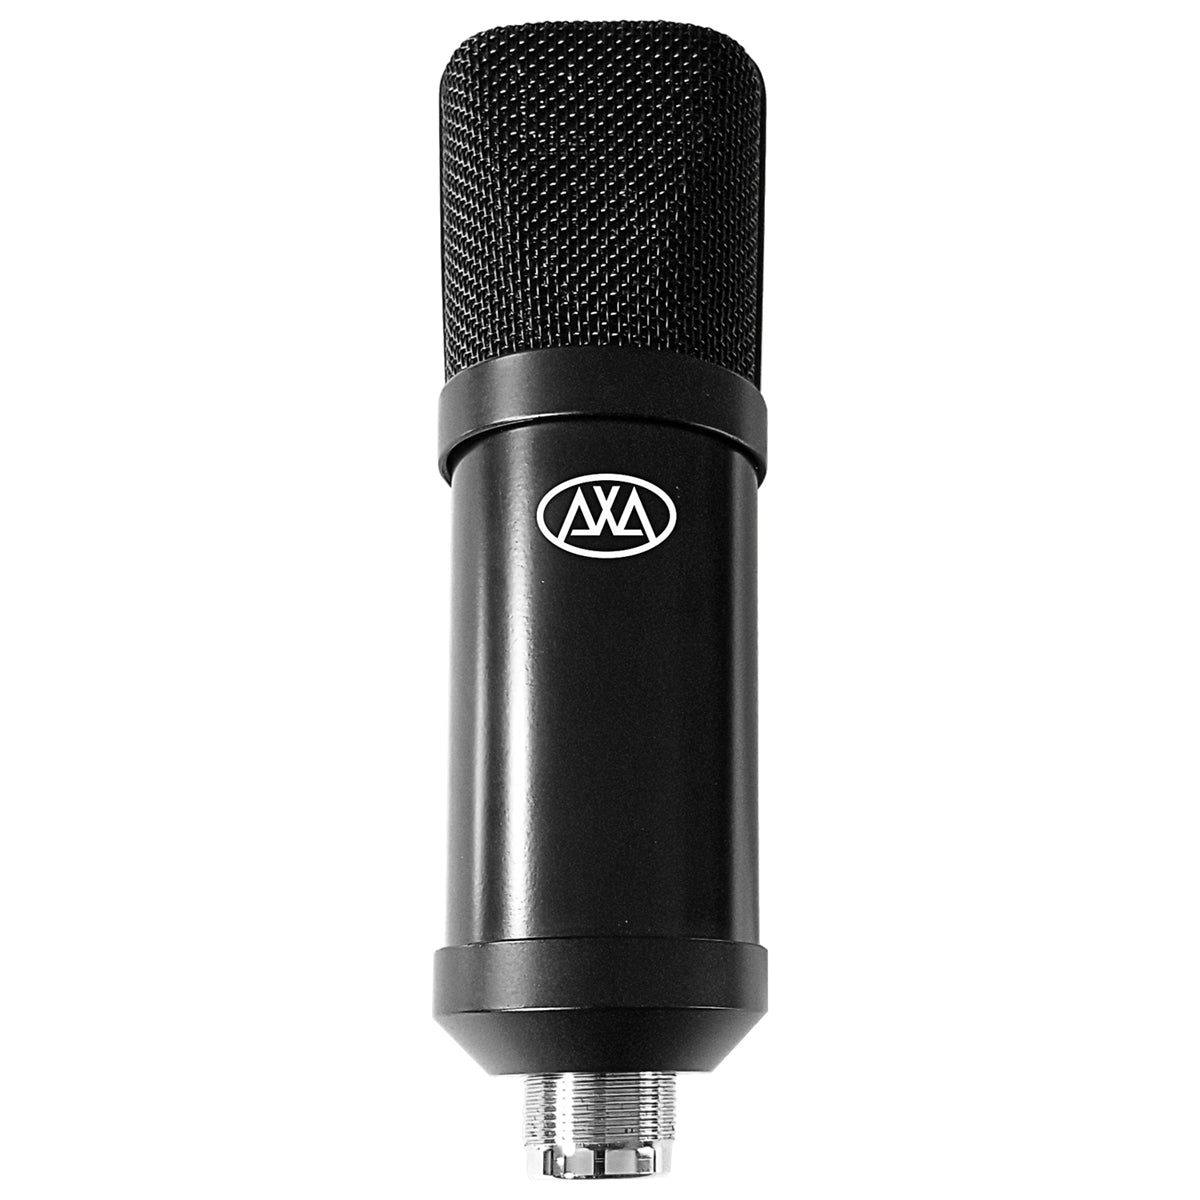 AxcessAbles MX-715 USB Studio Condenser Recording Microphone for PC Laptop MAC or Windows, Cardioid Studio for Recording Vocals, Voice-Overs, Streaming Broadcasts and YouTube Videos